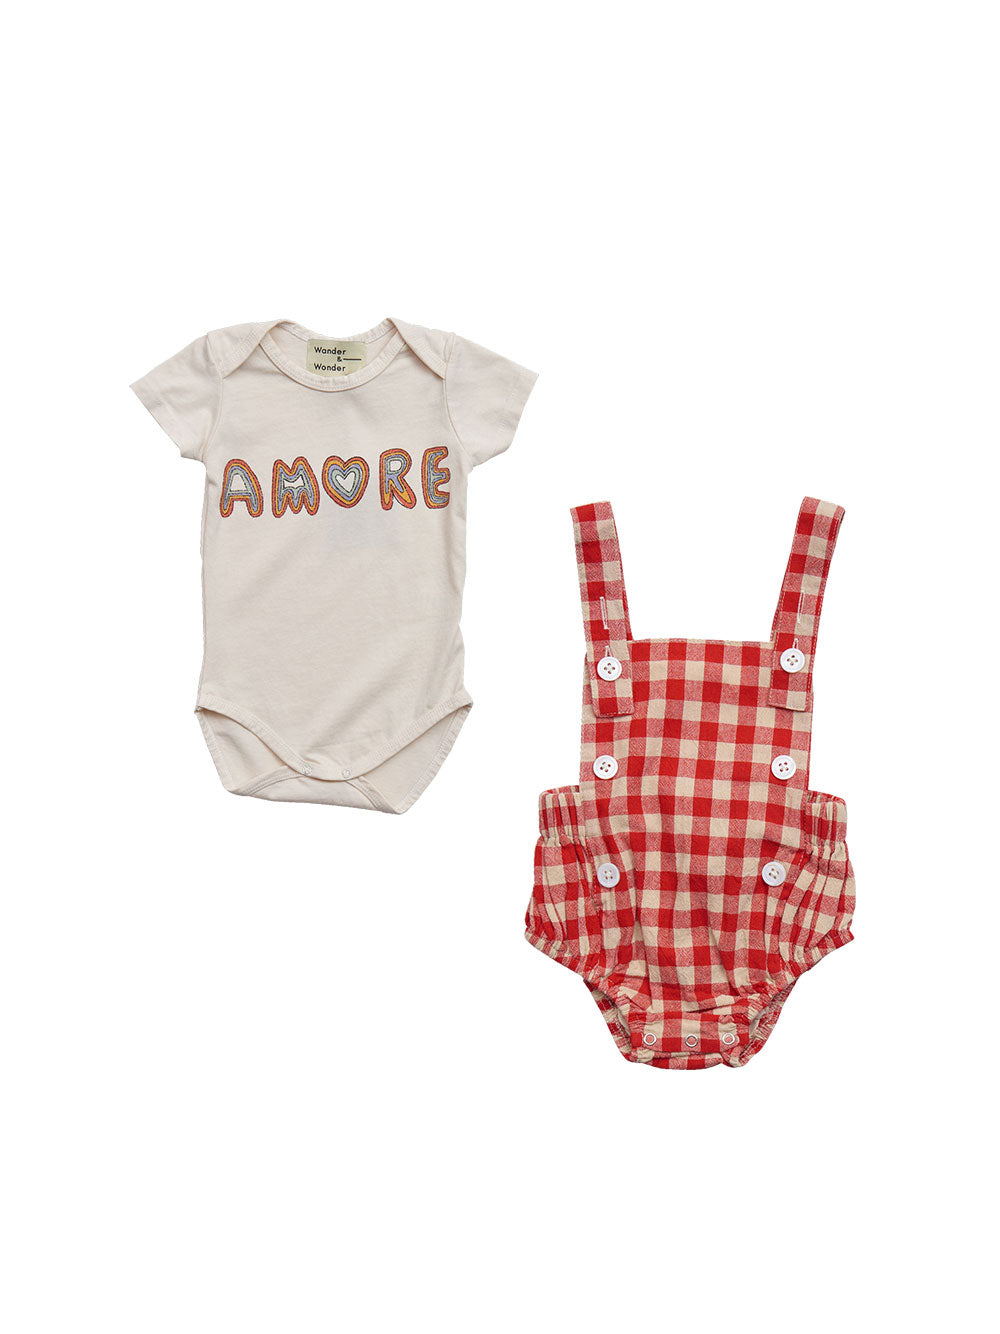 Gingham Red Check Baby Romper